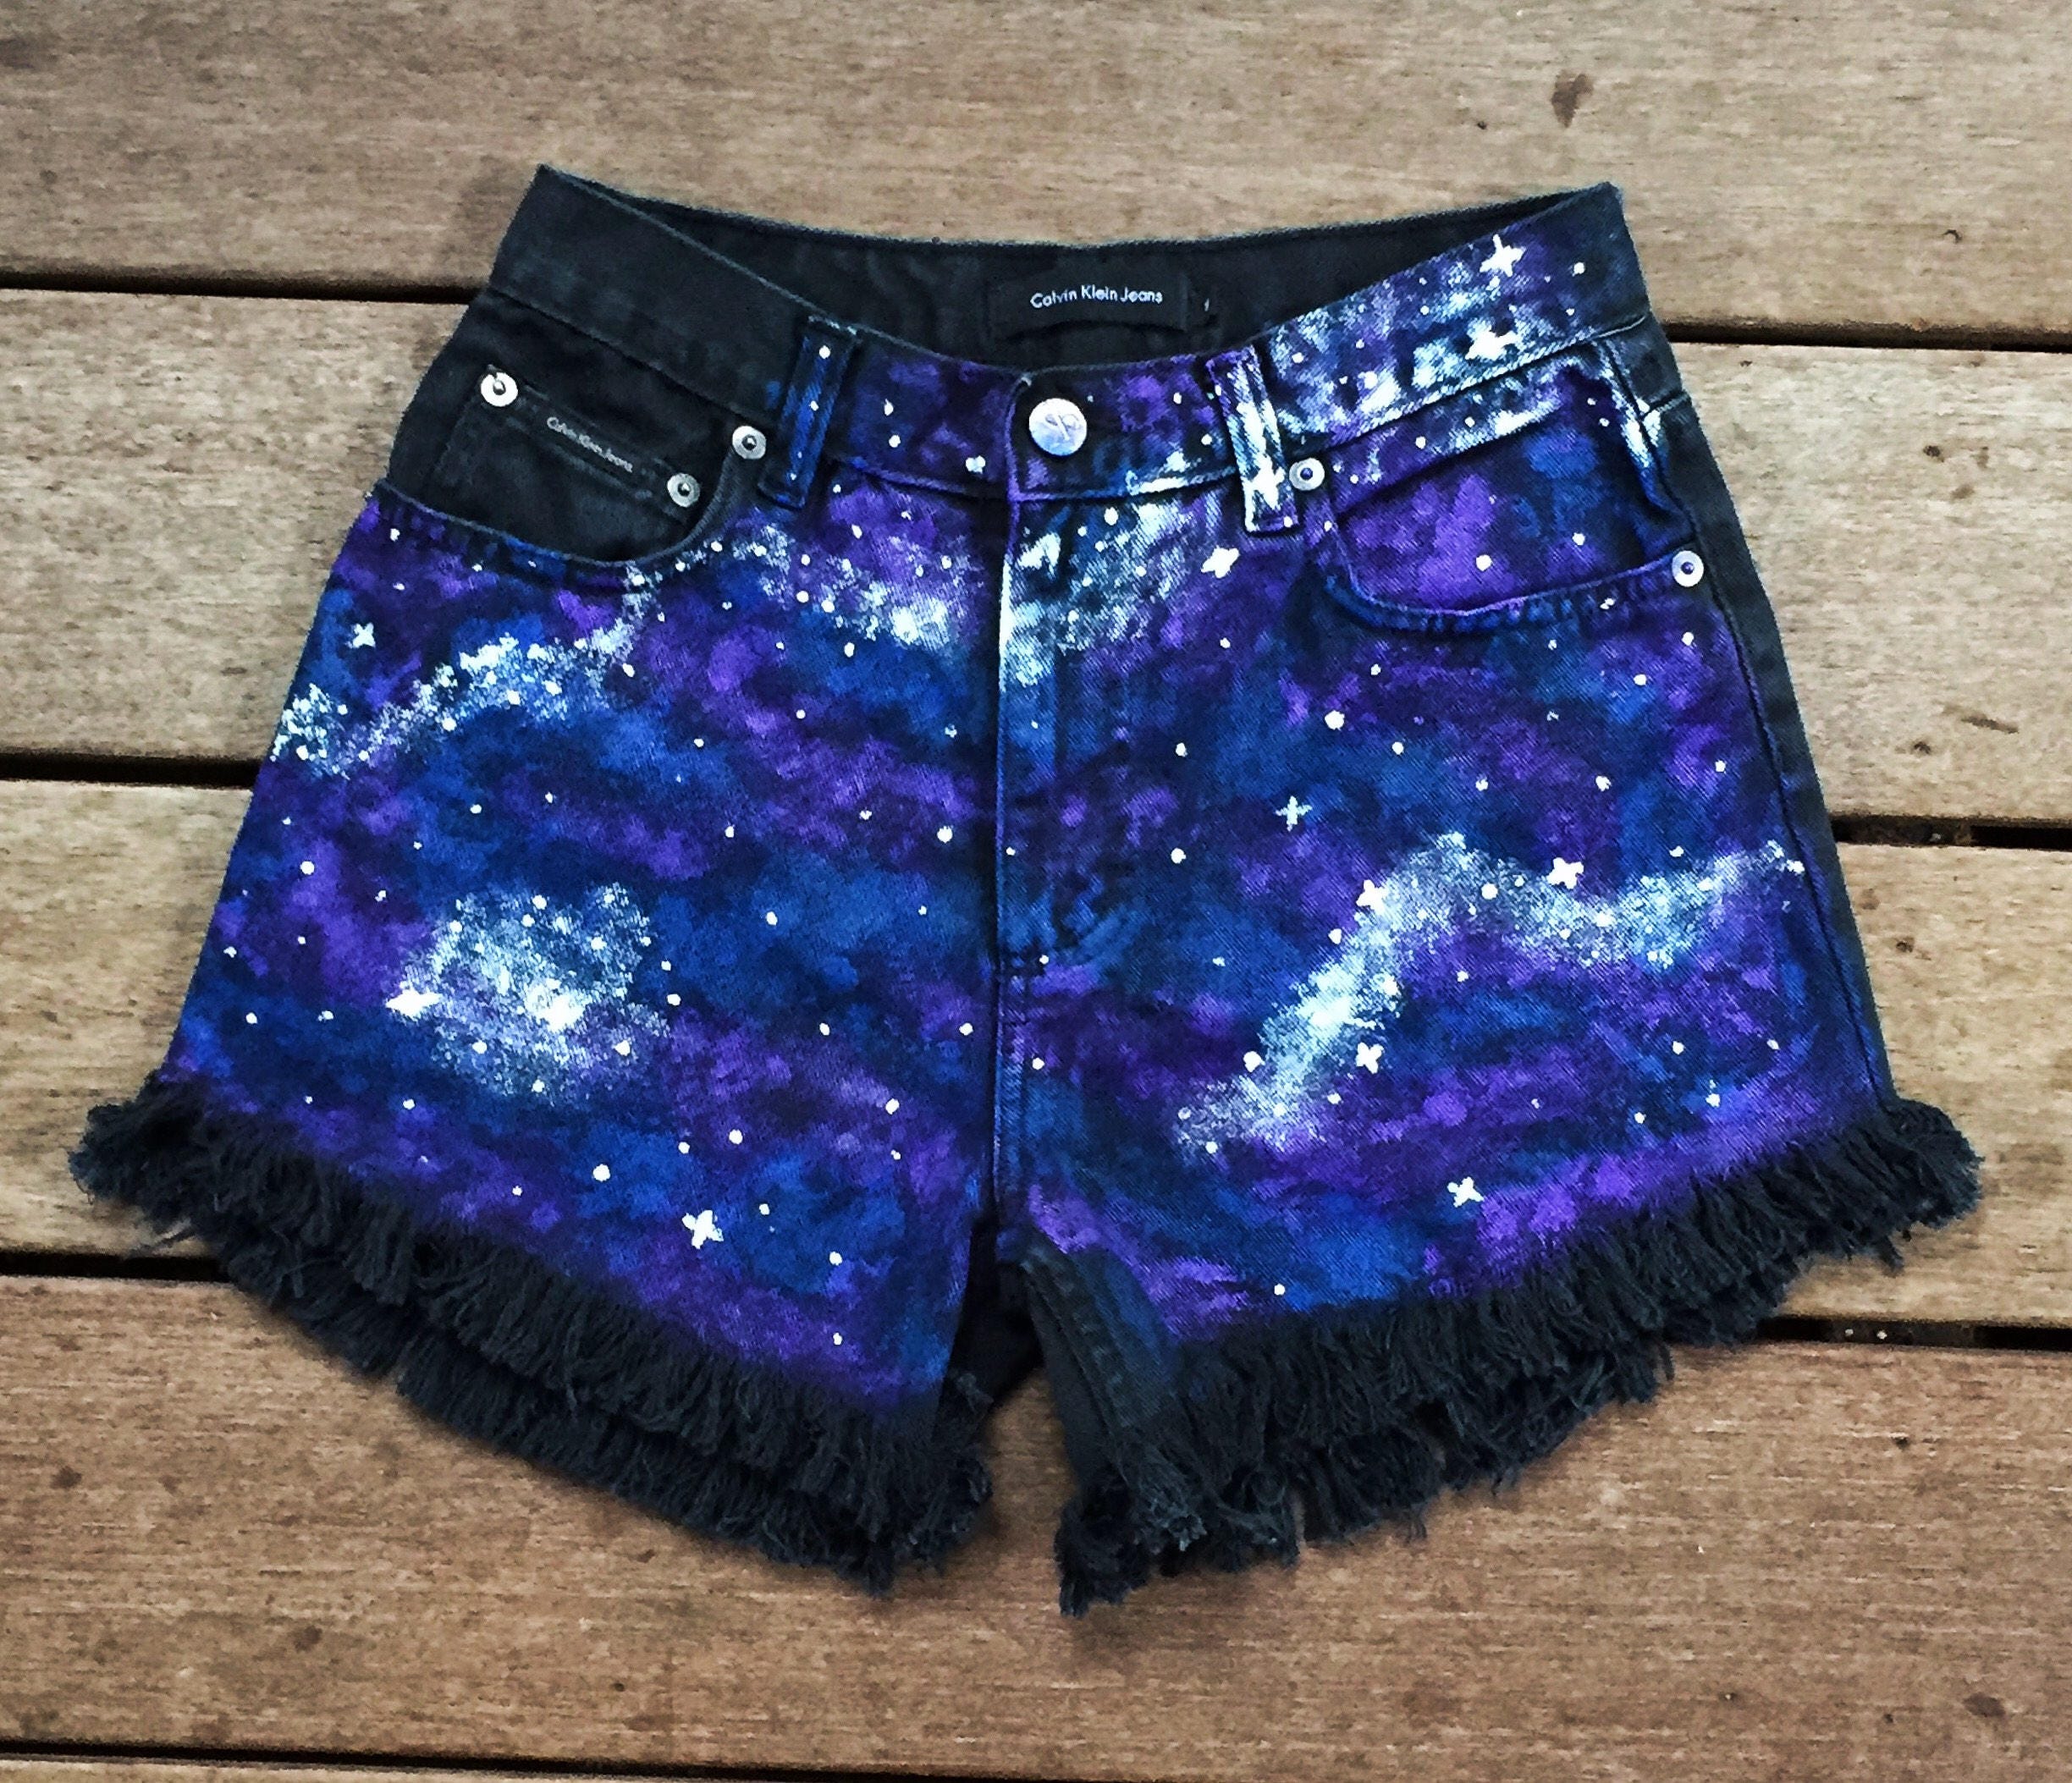 Outer Space Shorts Pattern ANY SIZE Custom Cutoffs Galaxy